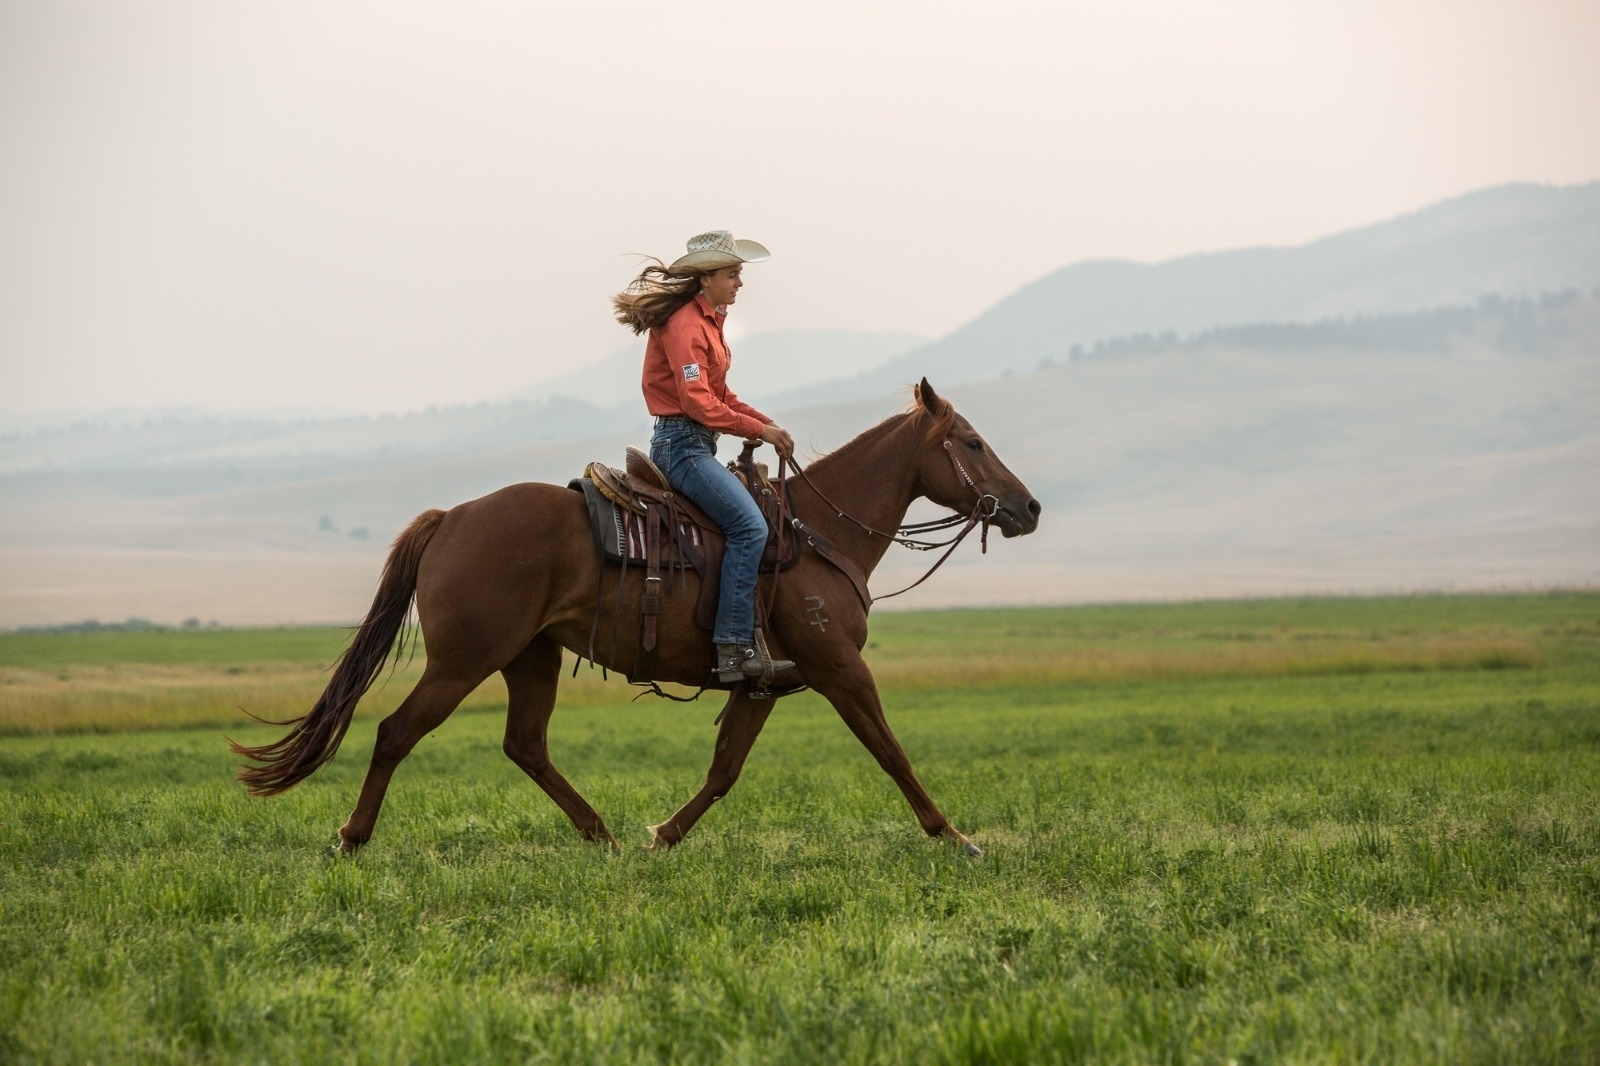 Irene Johnson rides her horse, Perky, on the U-Cross Ranch outside of Roy, Montana. Photo by Louise Johns